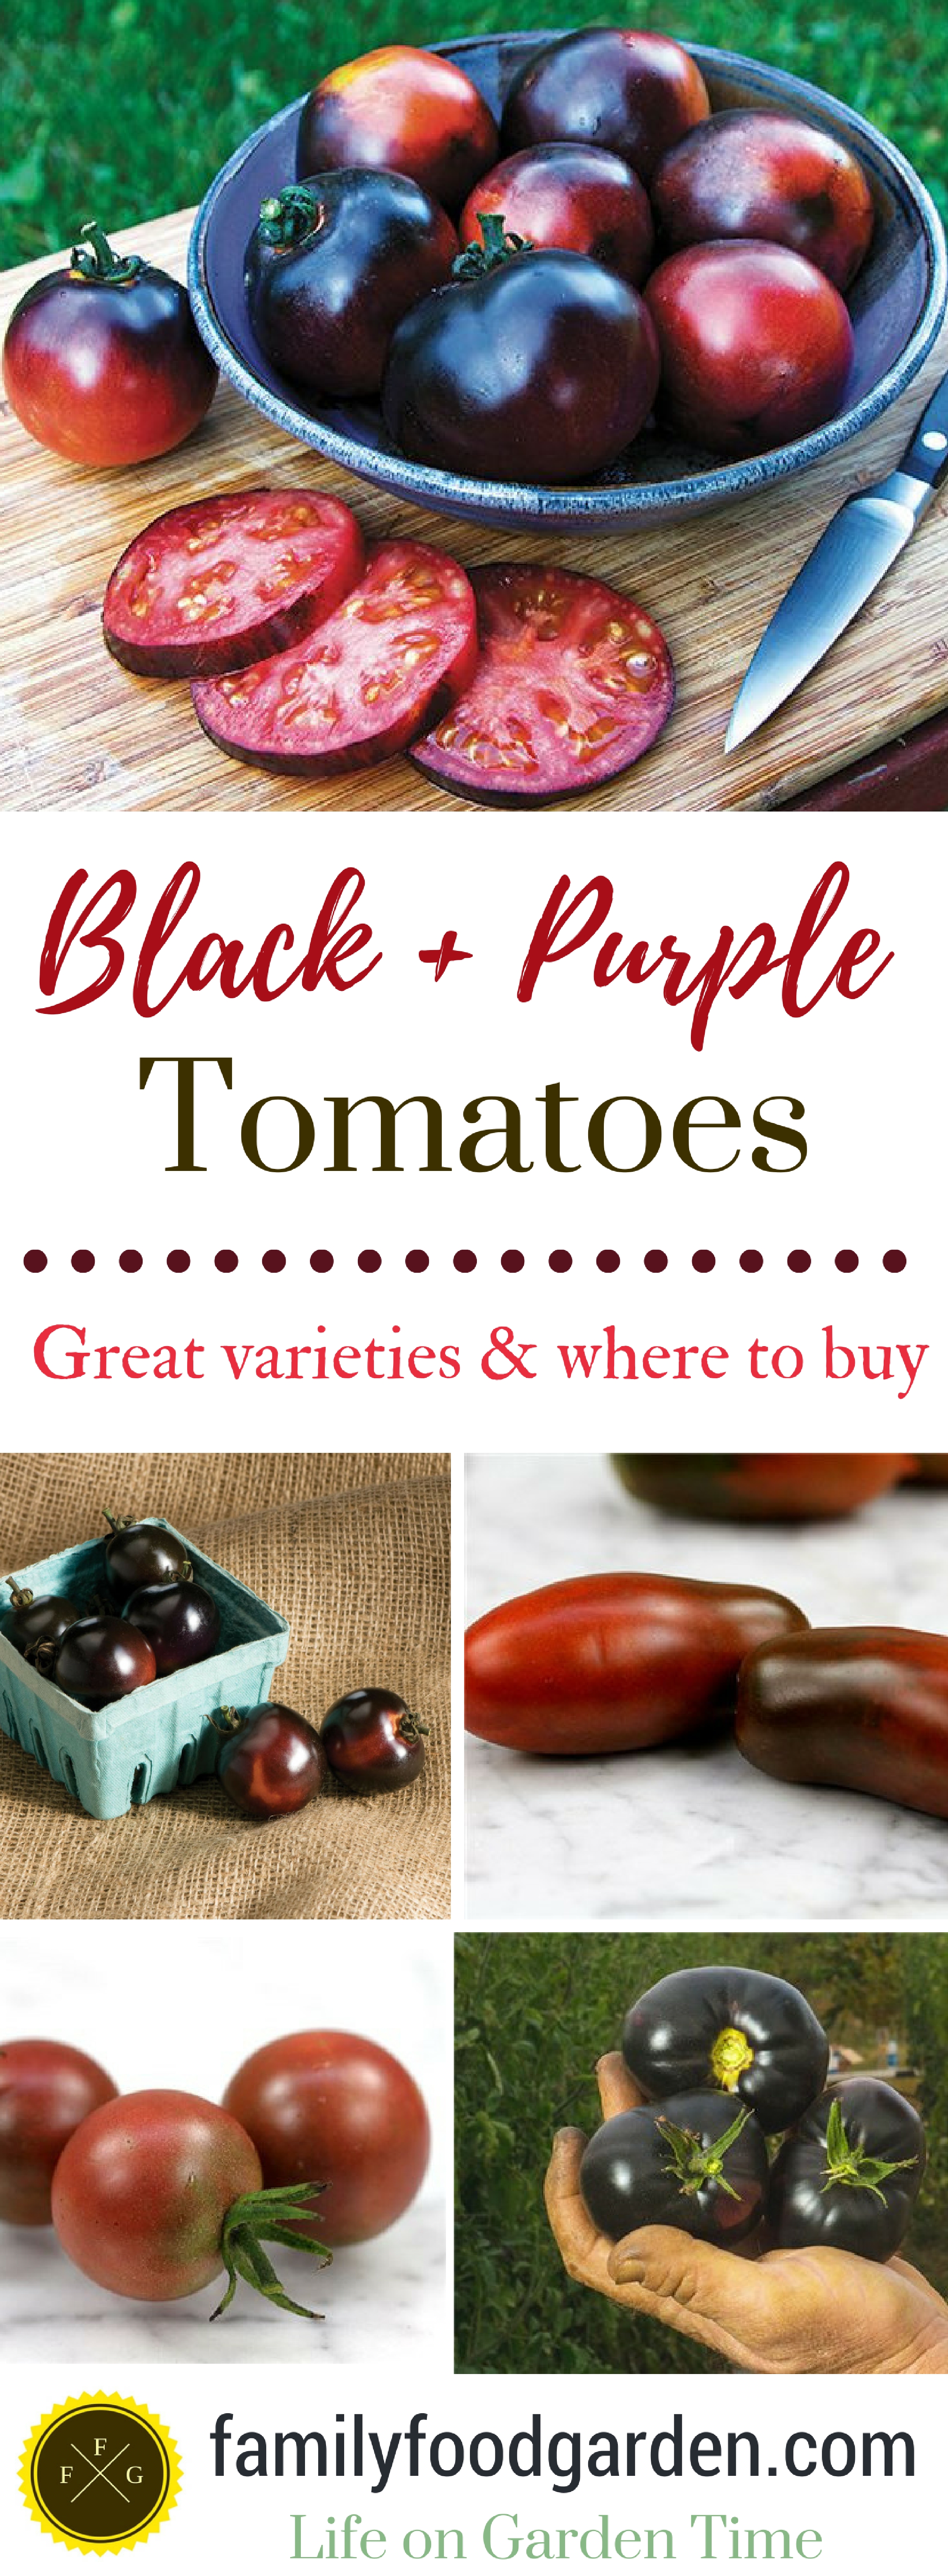 Black and Purple Tomatoes: Great Varieties & where to buy